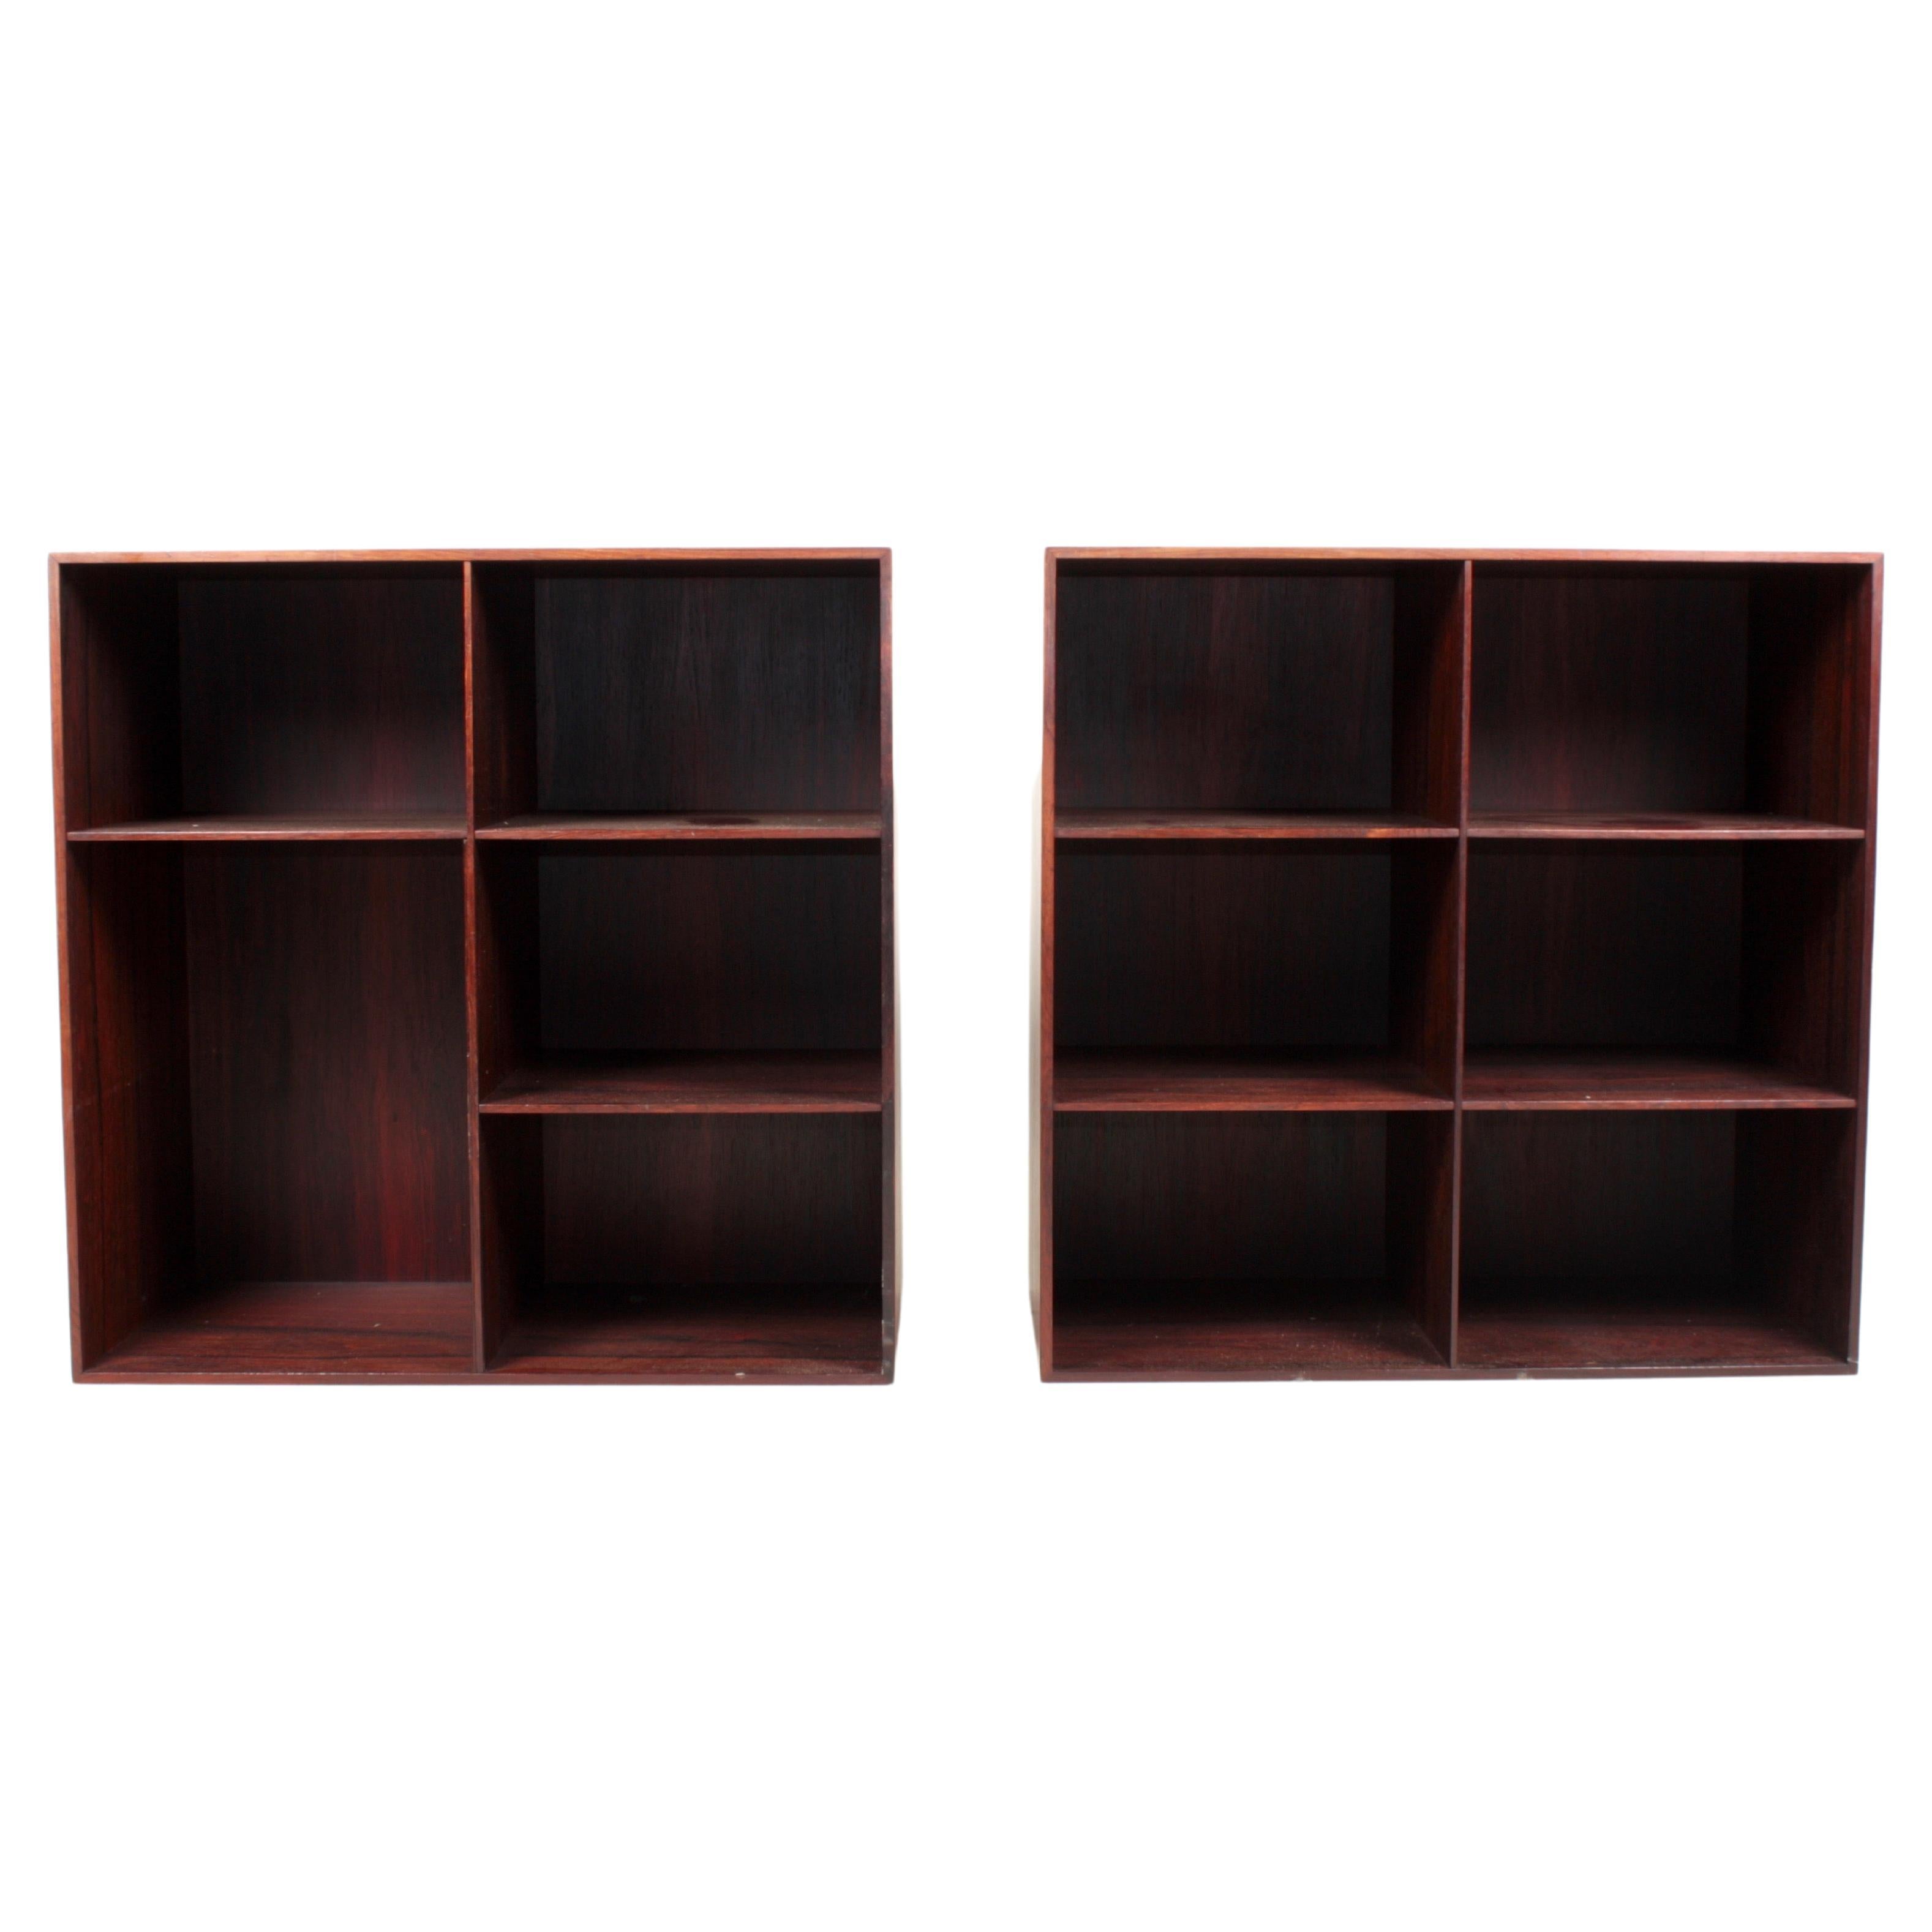 Pair of Bookcases in Rosewood by Mogens Koch, Danish Design, Mid-Century, 1950s